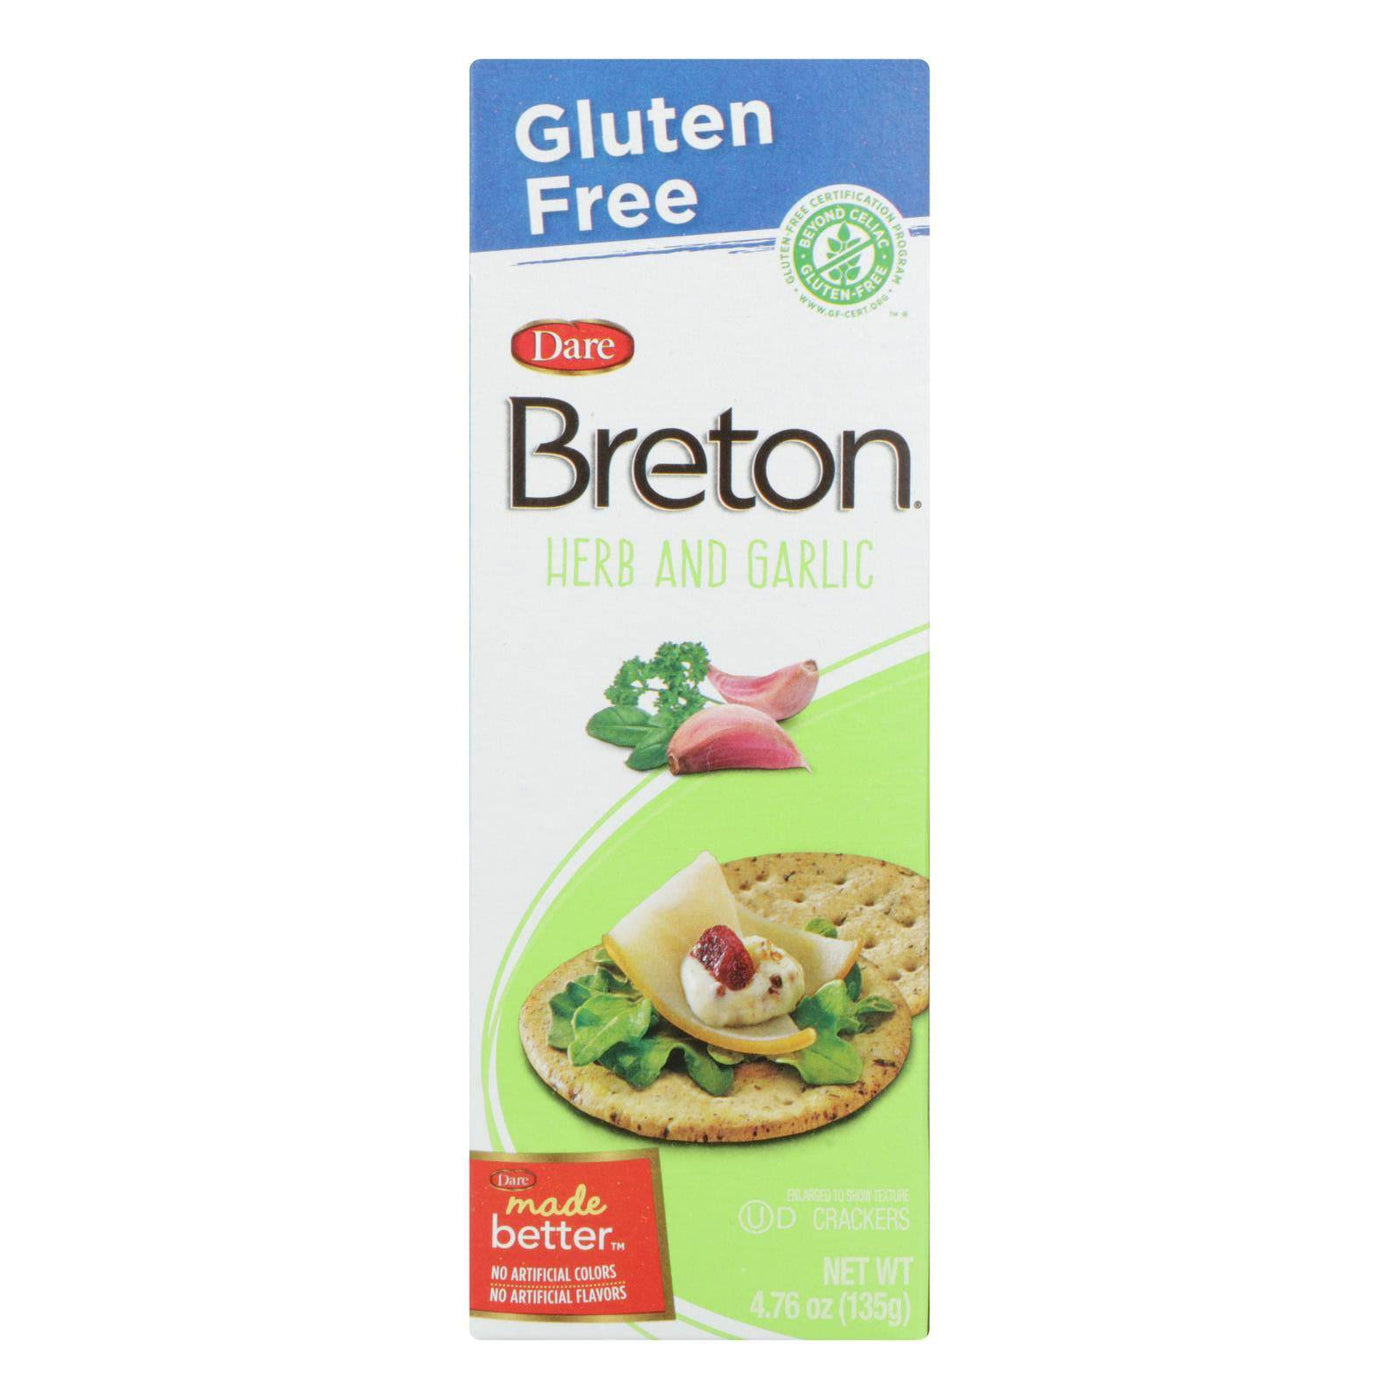 Buy Breton-dare - Crackers - Herb And Garlic - Case Of 6 - 4.76 Oz.  at OnlyNaturals.us